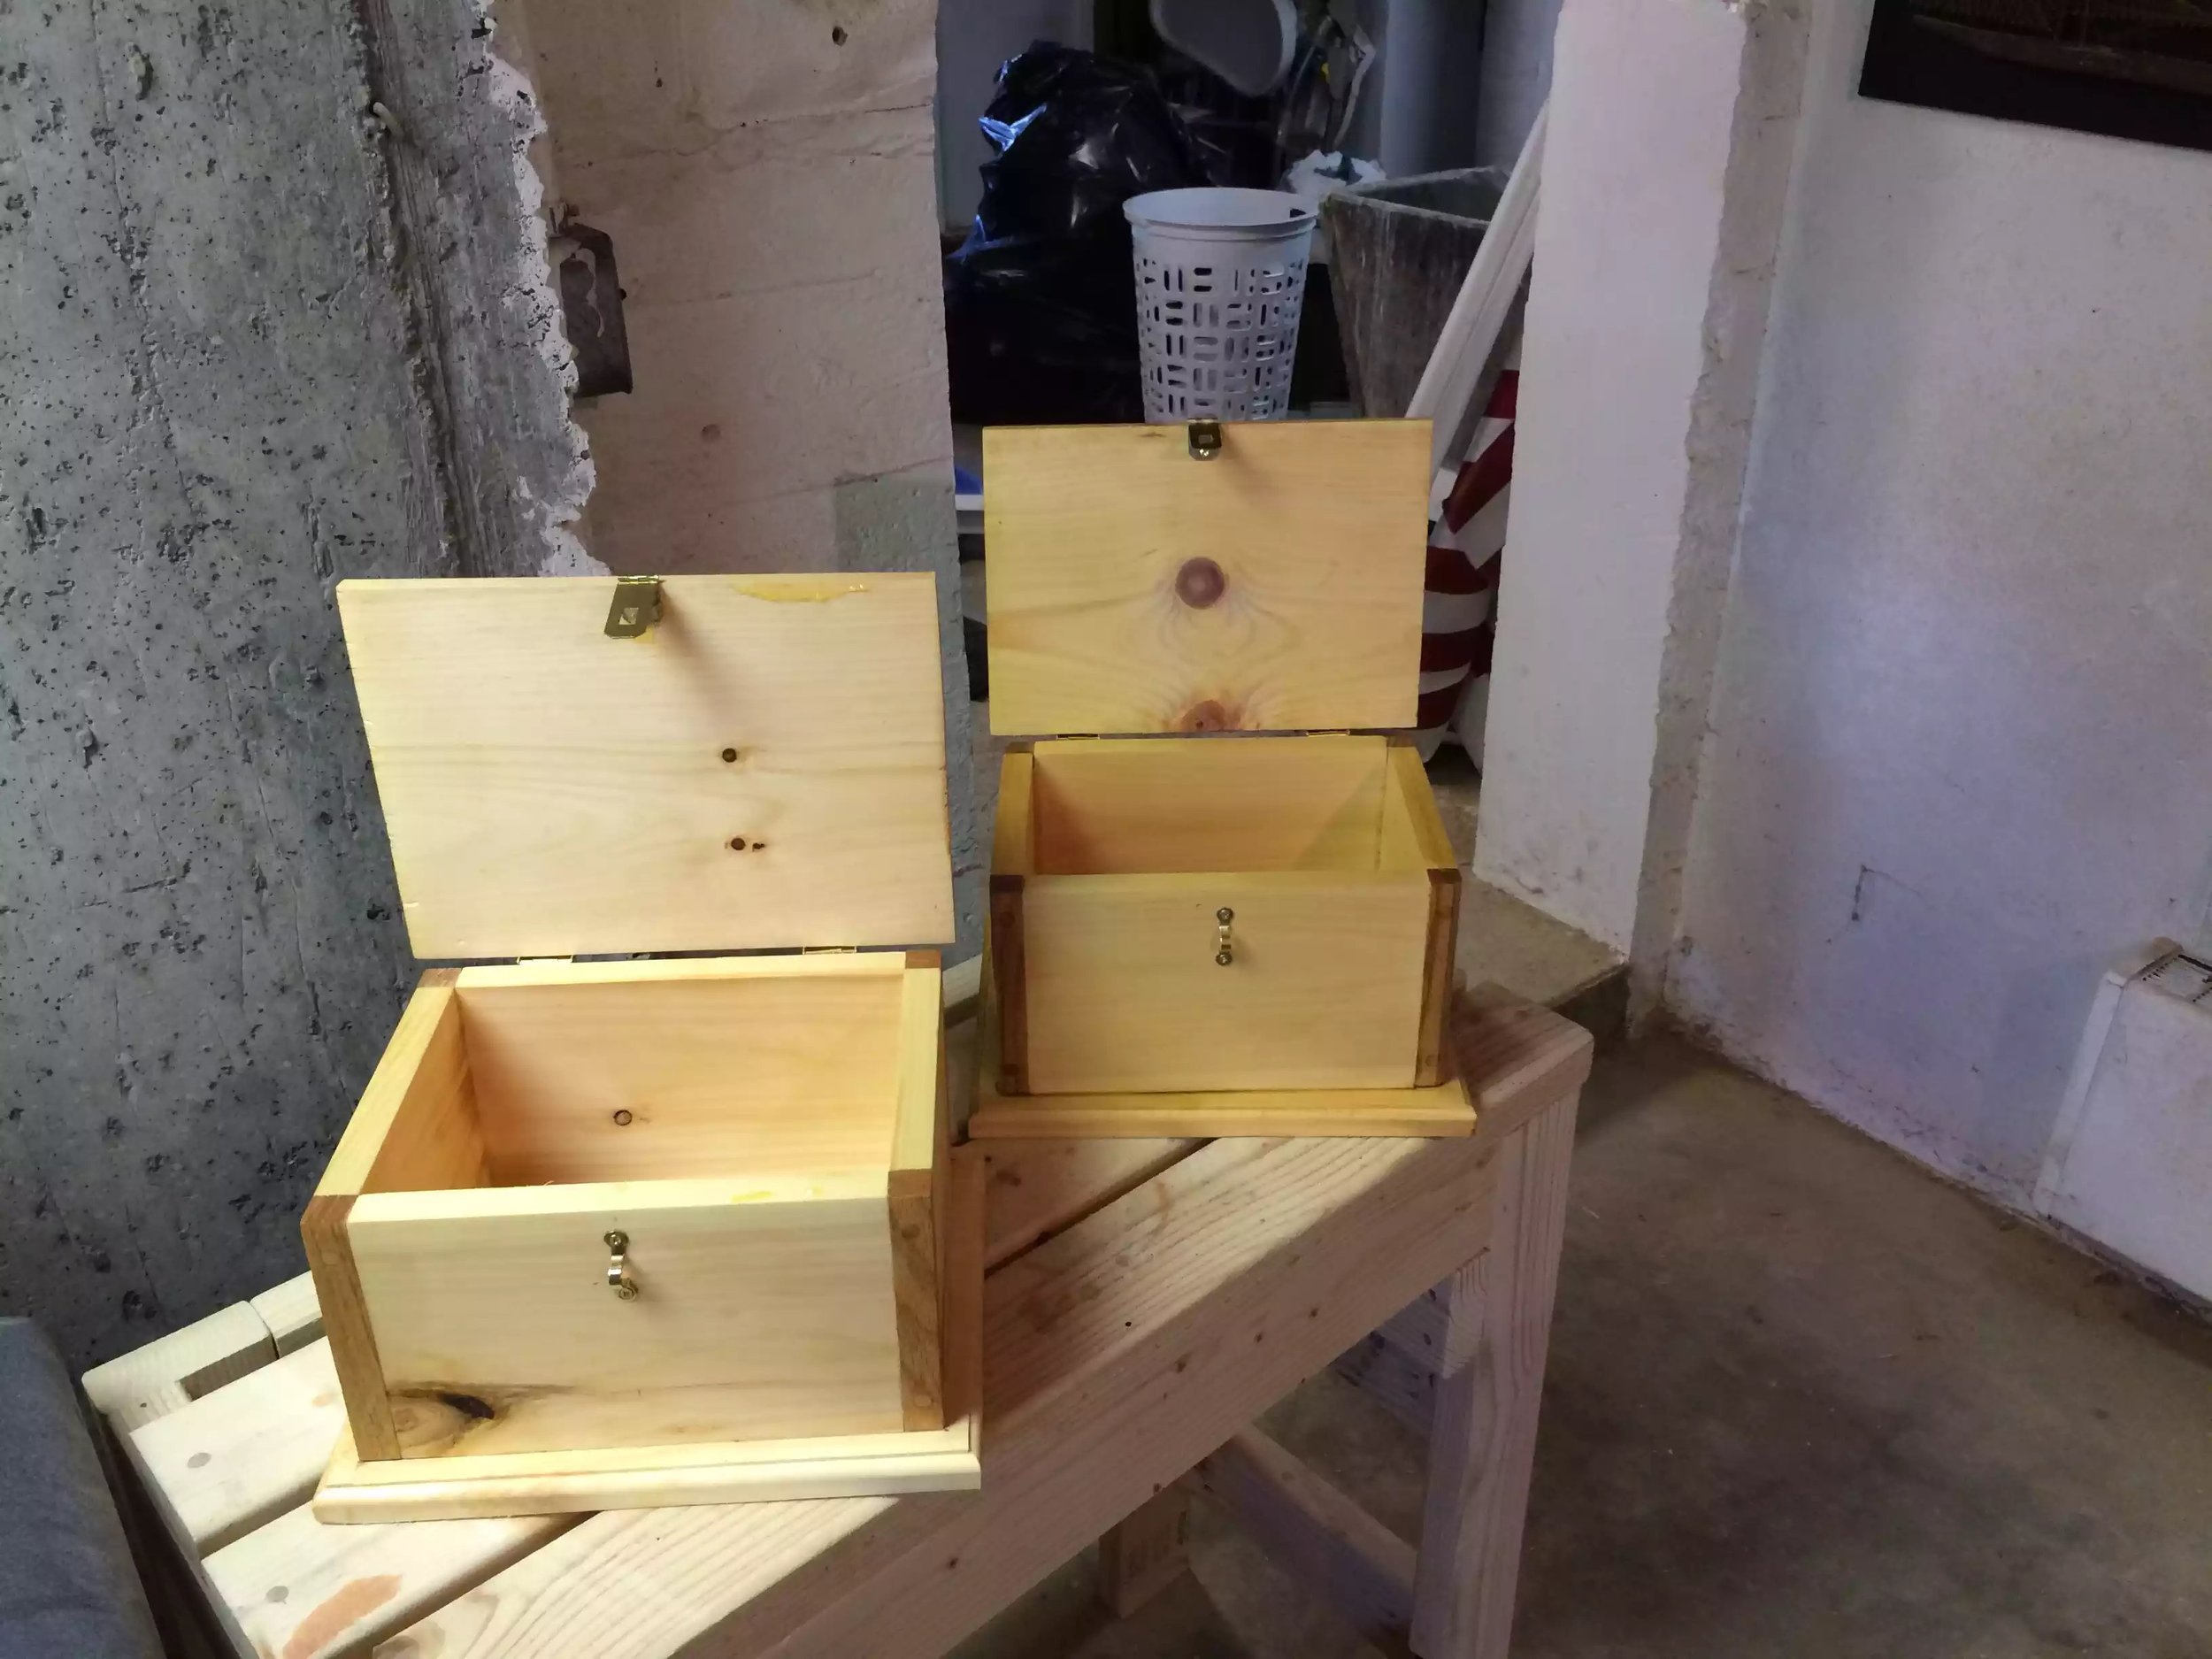 My sons keepsake boxes completed, Love the oak accents on the corners